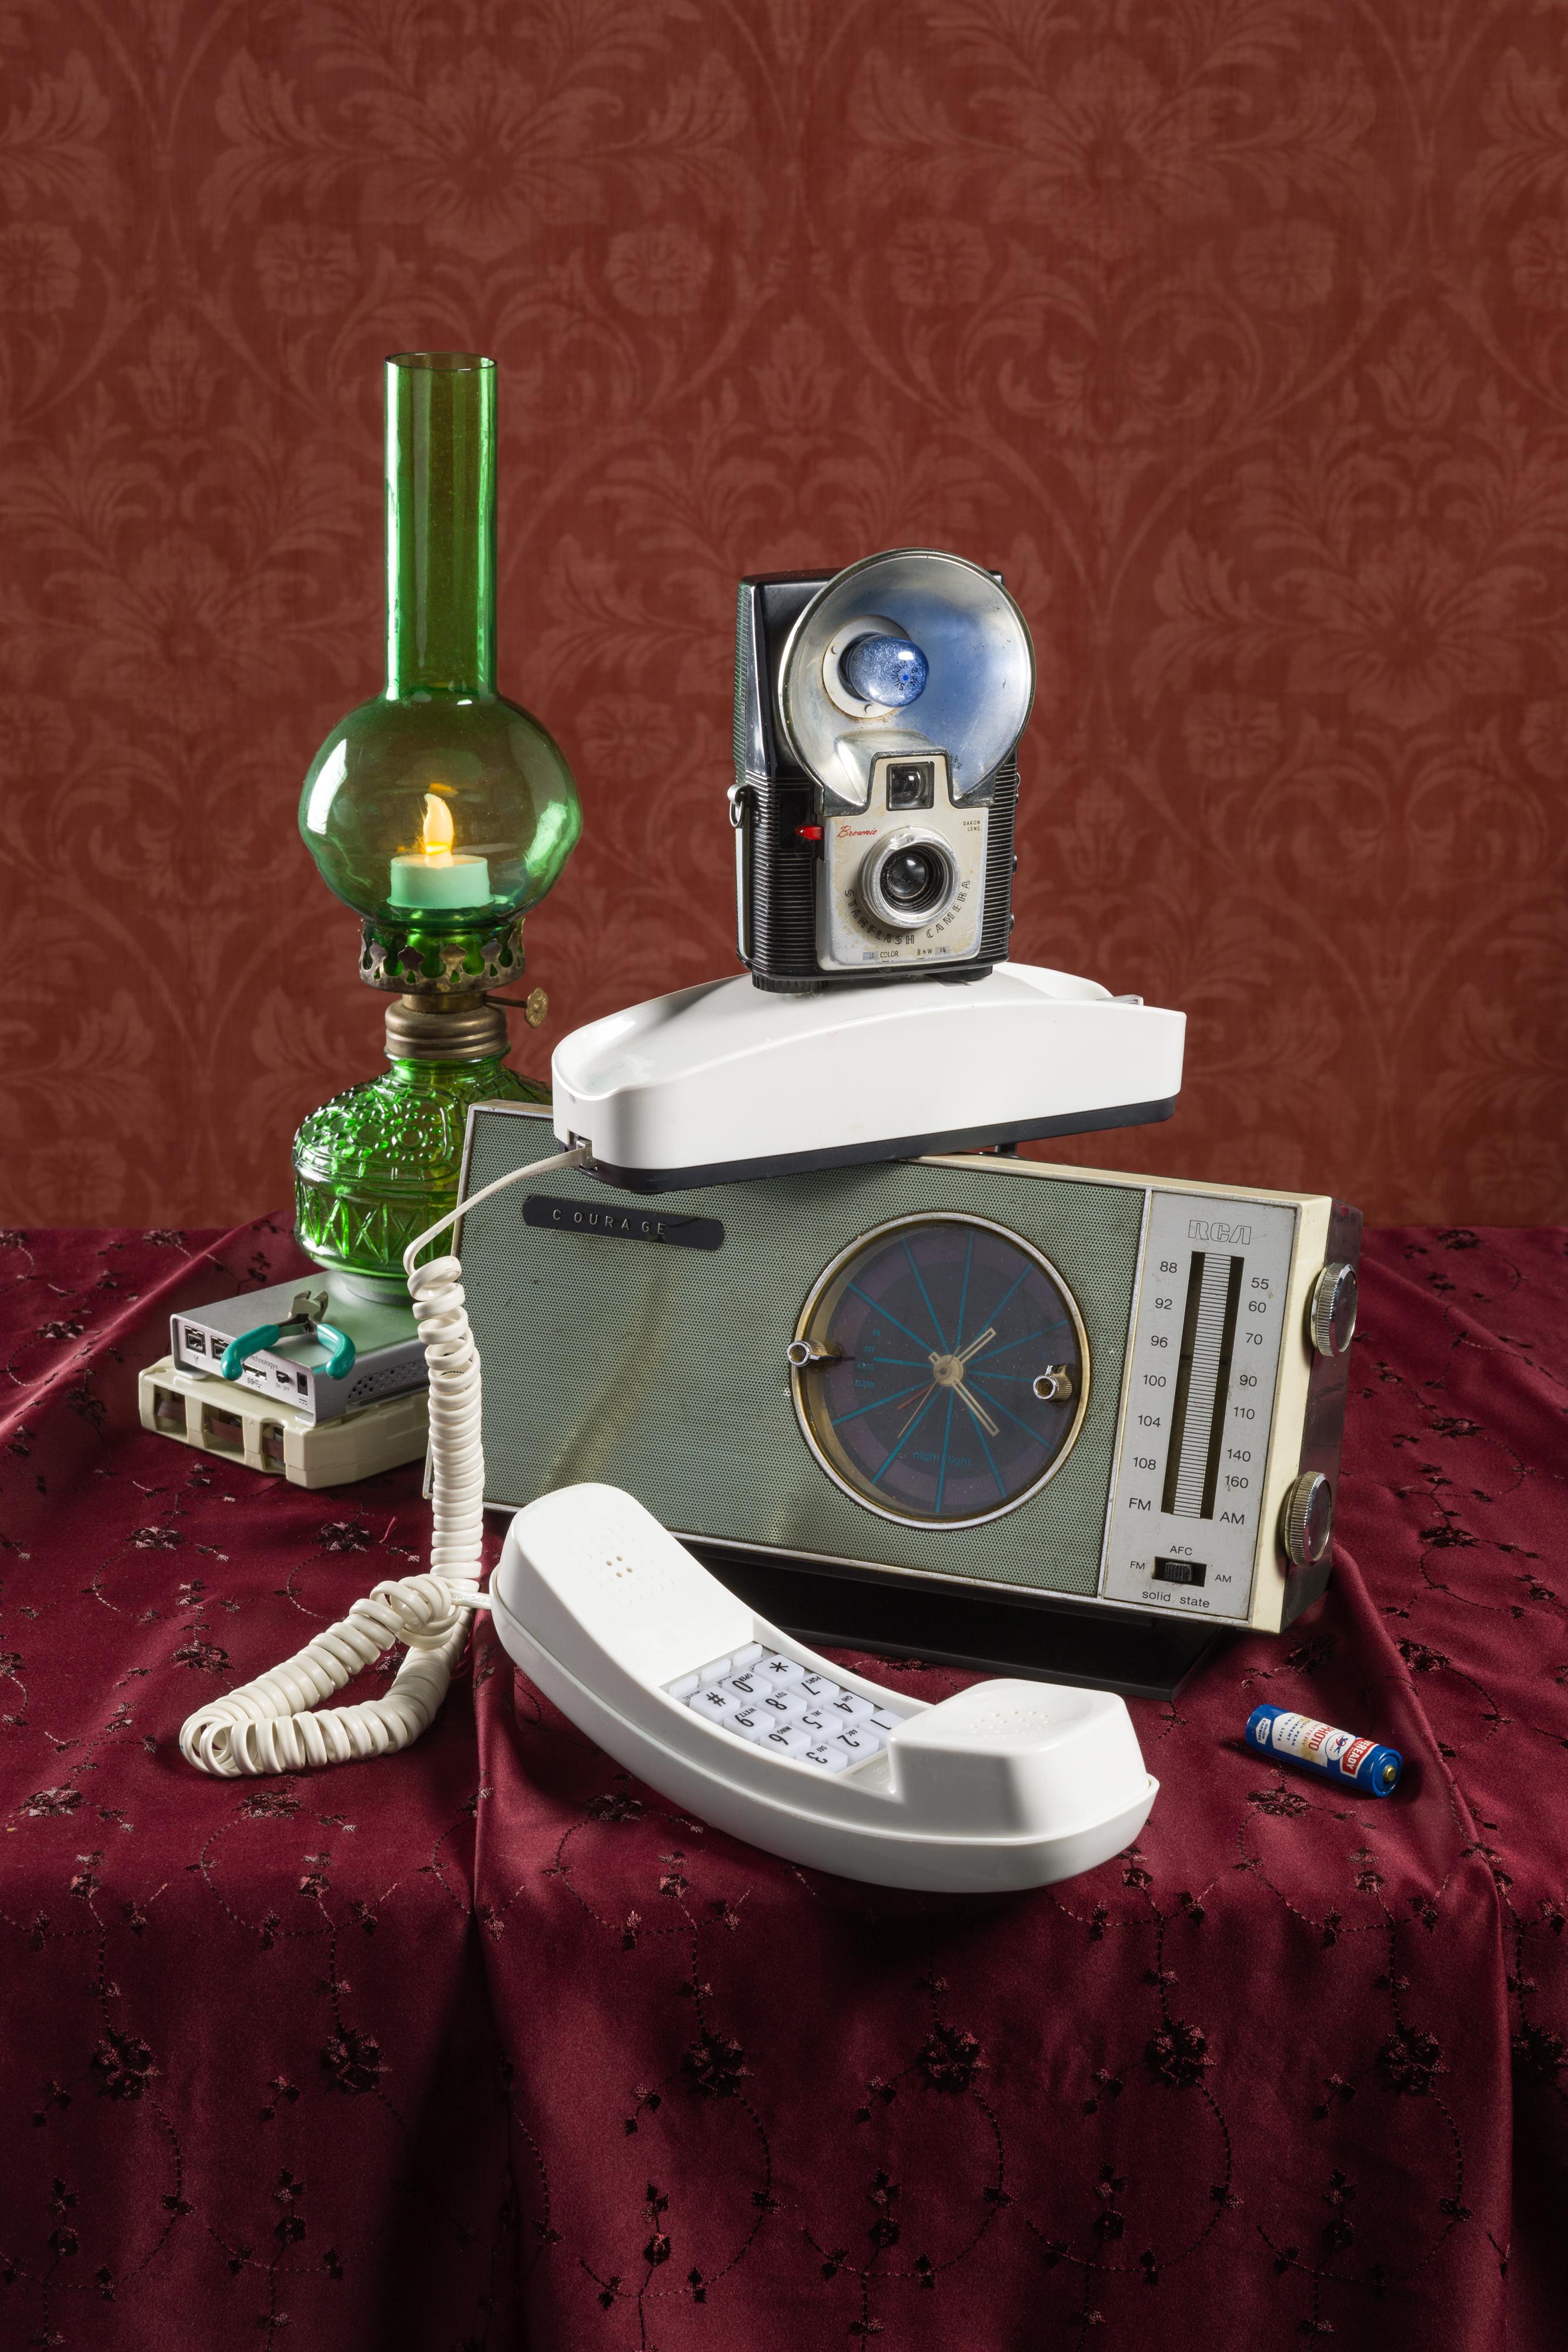 Jeanette May Still-Life Photograph - “Still Life with Clock Radio” Contemporary Still-life Photo with Vintage Tech